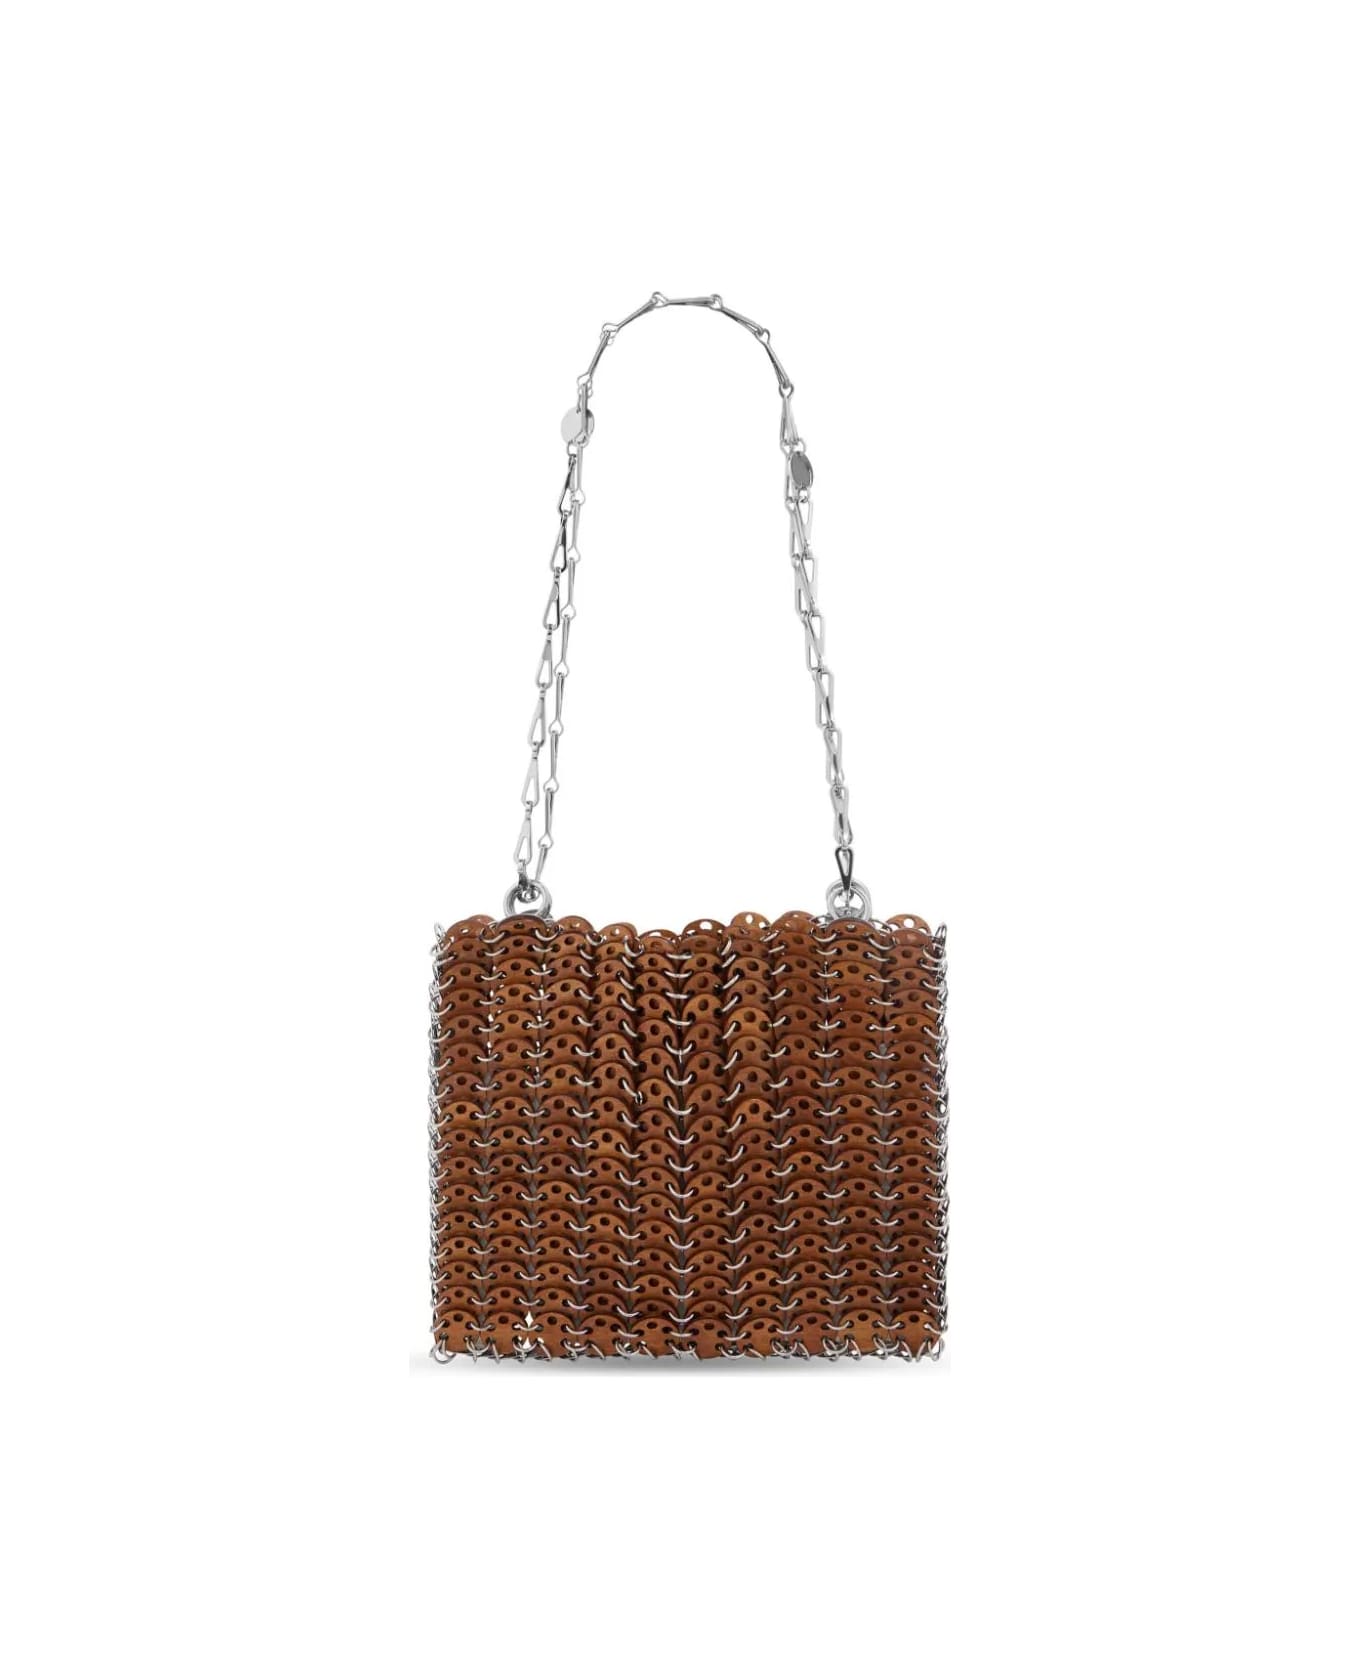 Paco Rabanne Iconic 1969 Bag In Brown Wood - Brown